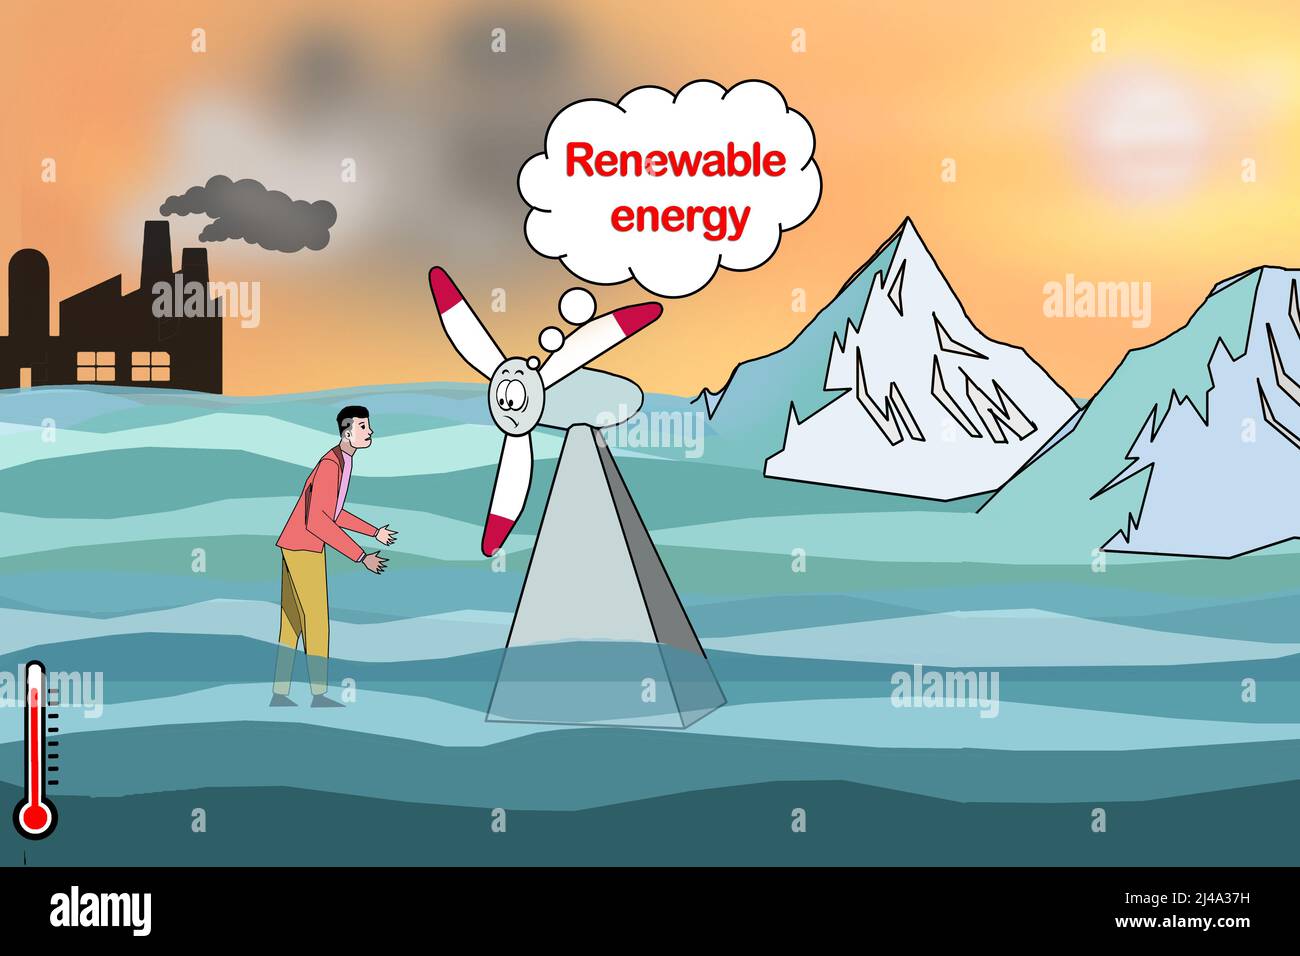 Global warming, climate change, sea level rise, temperature rise, green house gases, renewable energy, and glacier melting concept illustration Stock Photo